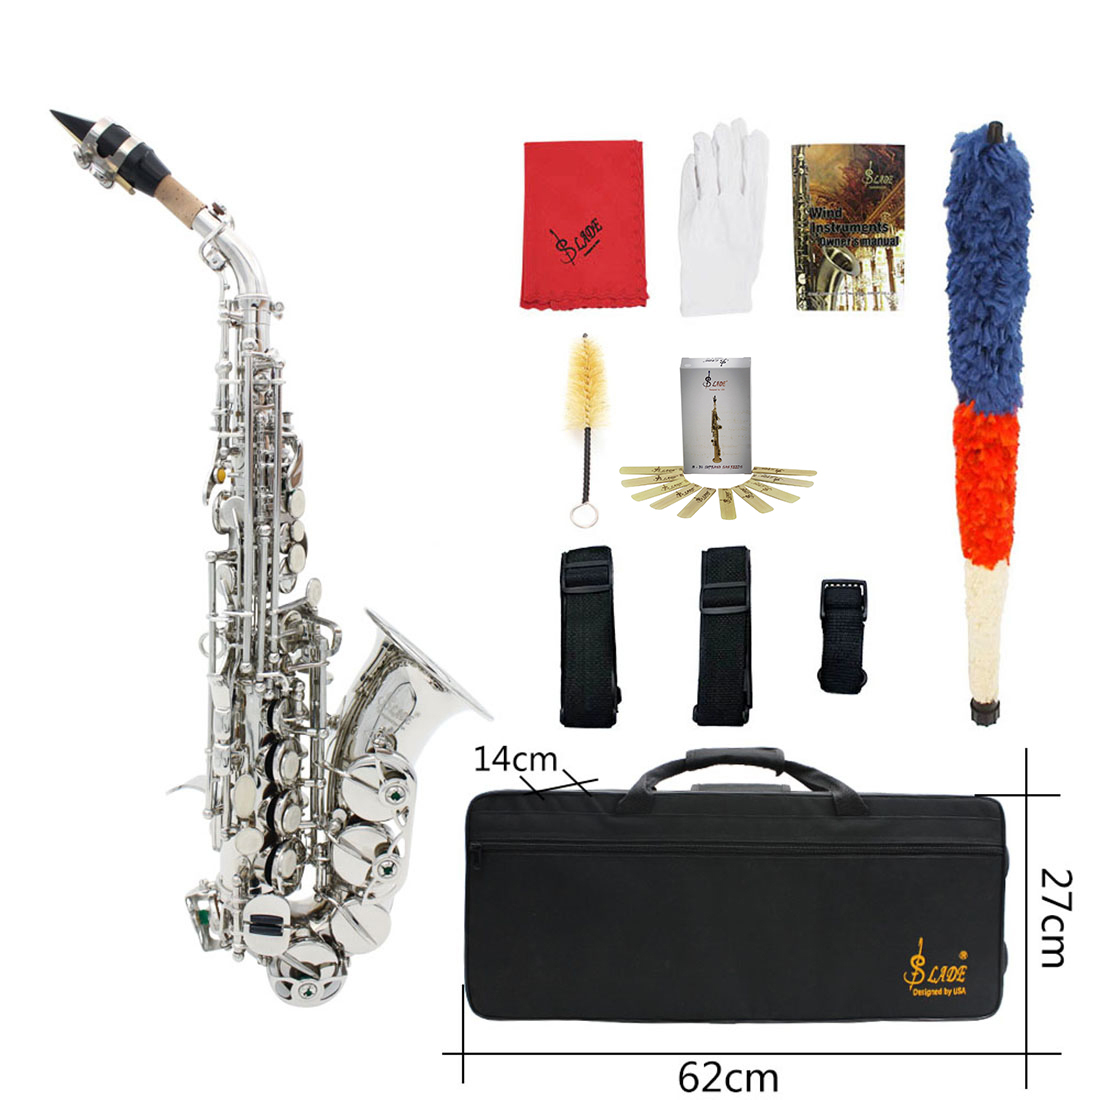 Slade Saxophone Alto Instrument E Fall Saxophone for Beginner with Cleaning Accessories - Photo: 9